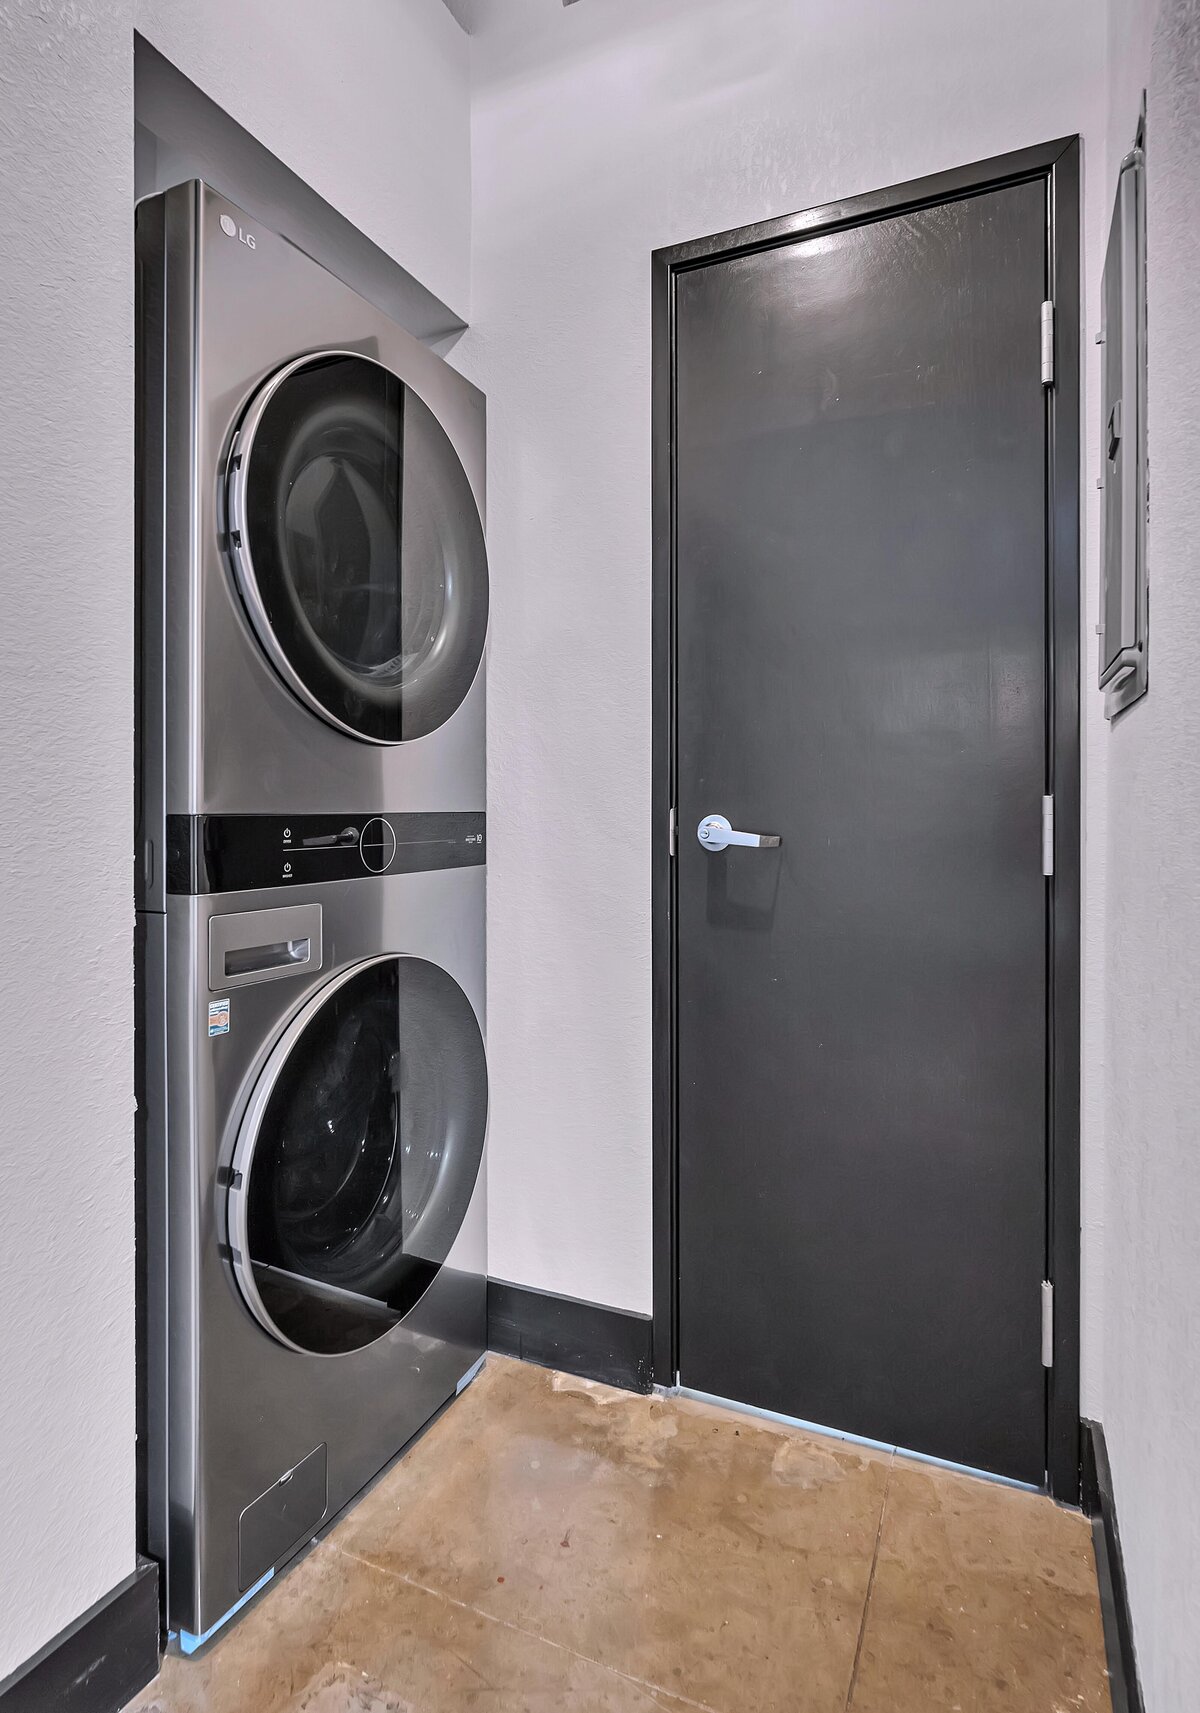 Washer and dryer are included in this one-bedroom, one-bathroom vintage condo that sleeps 4 in the historic Behrens building in the heart of the Magnolia Silo District in downtown Waco, TX.